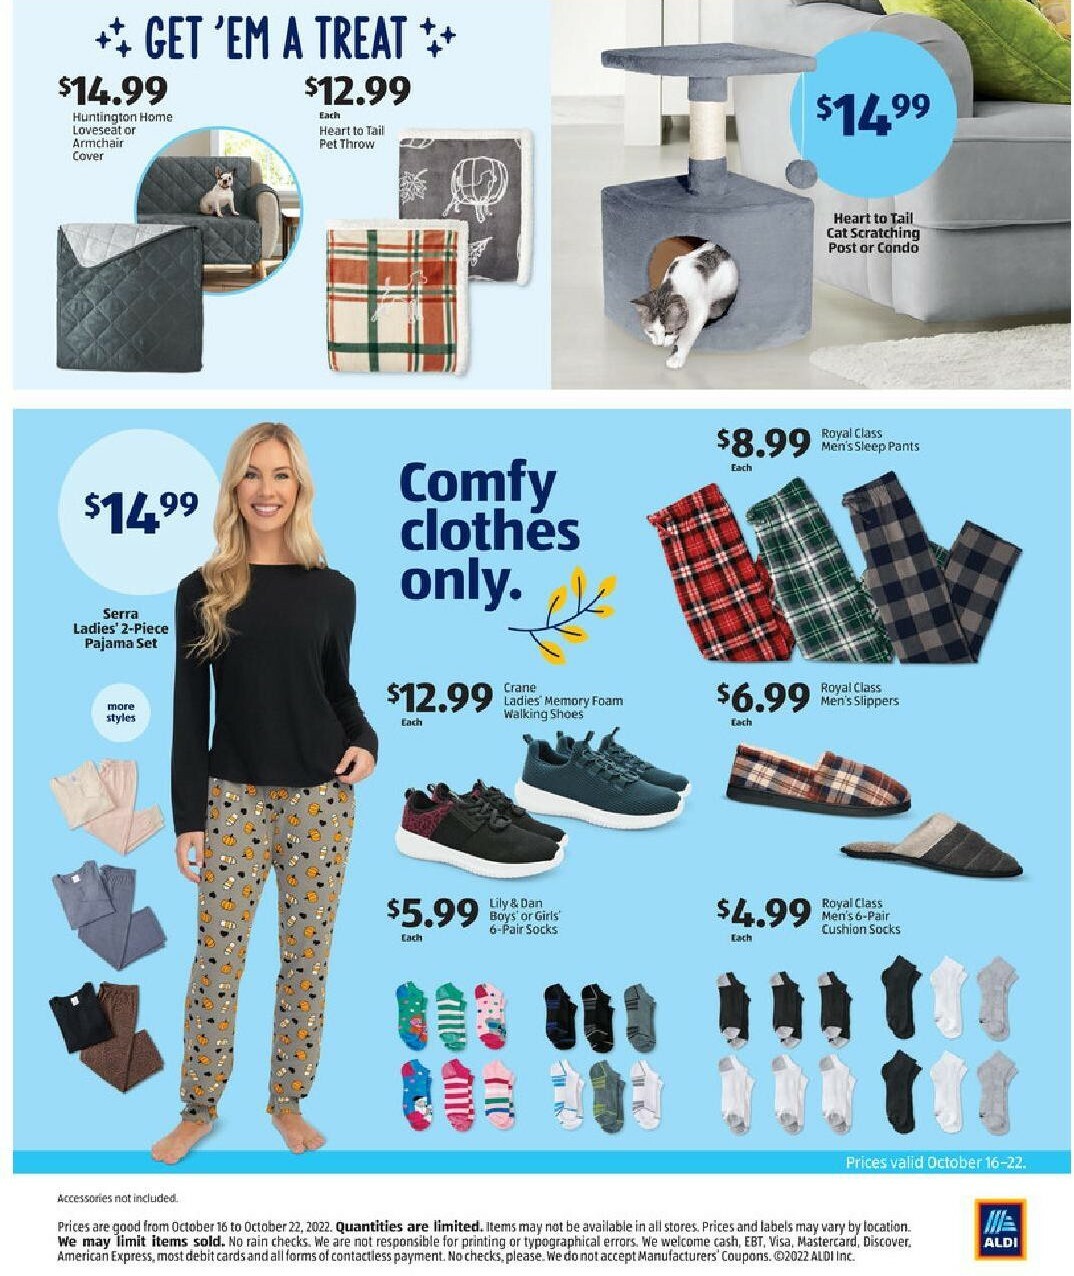 ALDI Weekly Ad from October 16